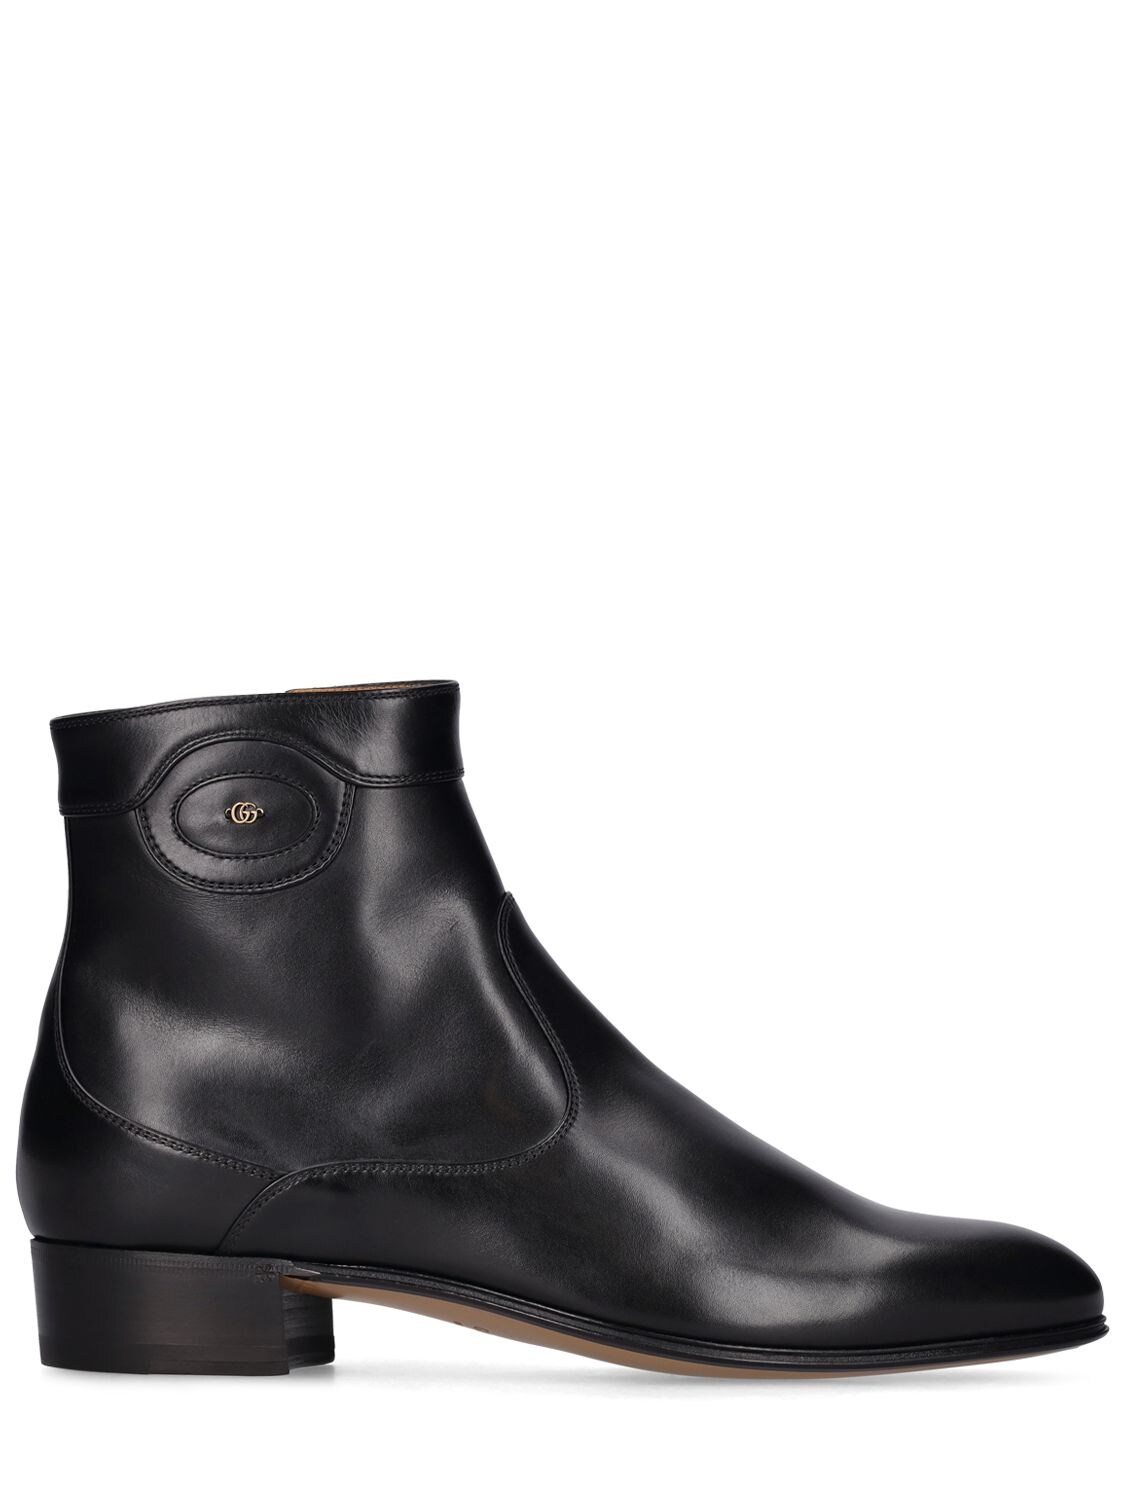 GUCCI ADEL LEATHER ANKLE BOOTS